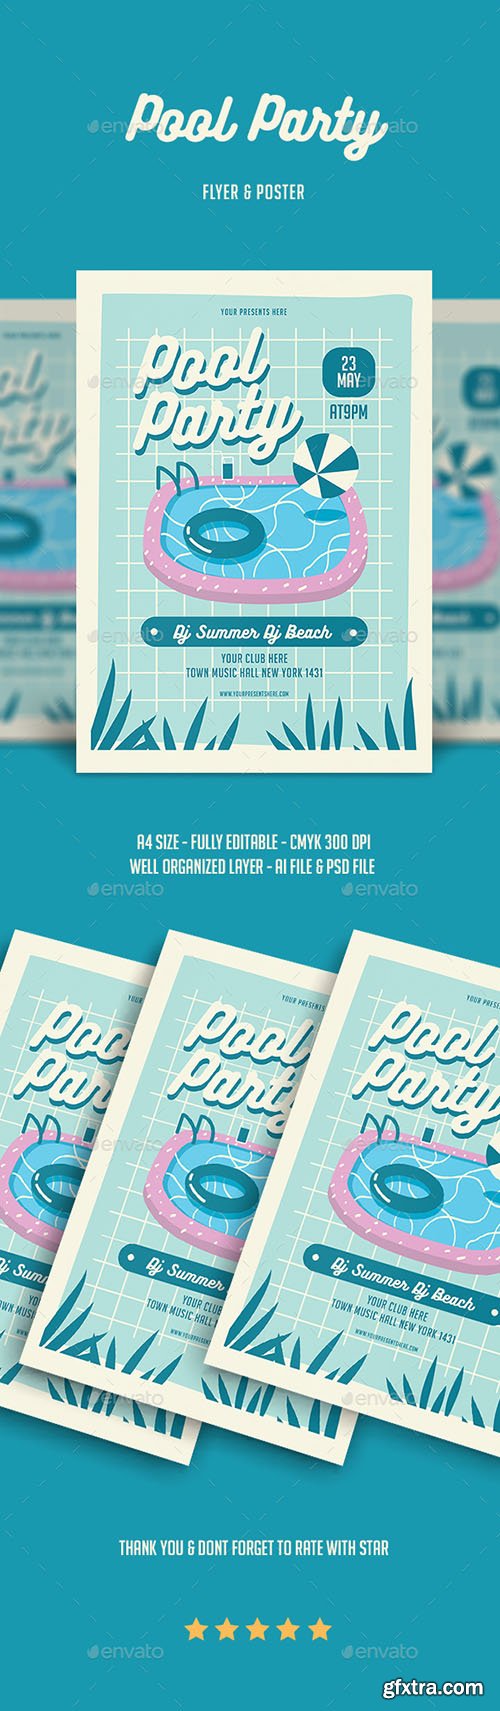 Pool Party Flyer 22011745